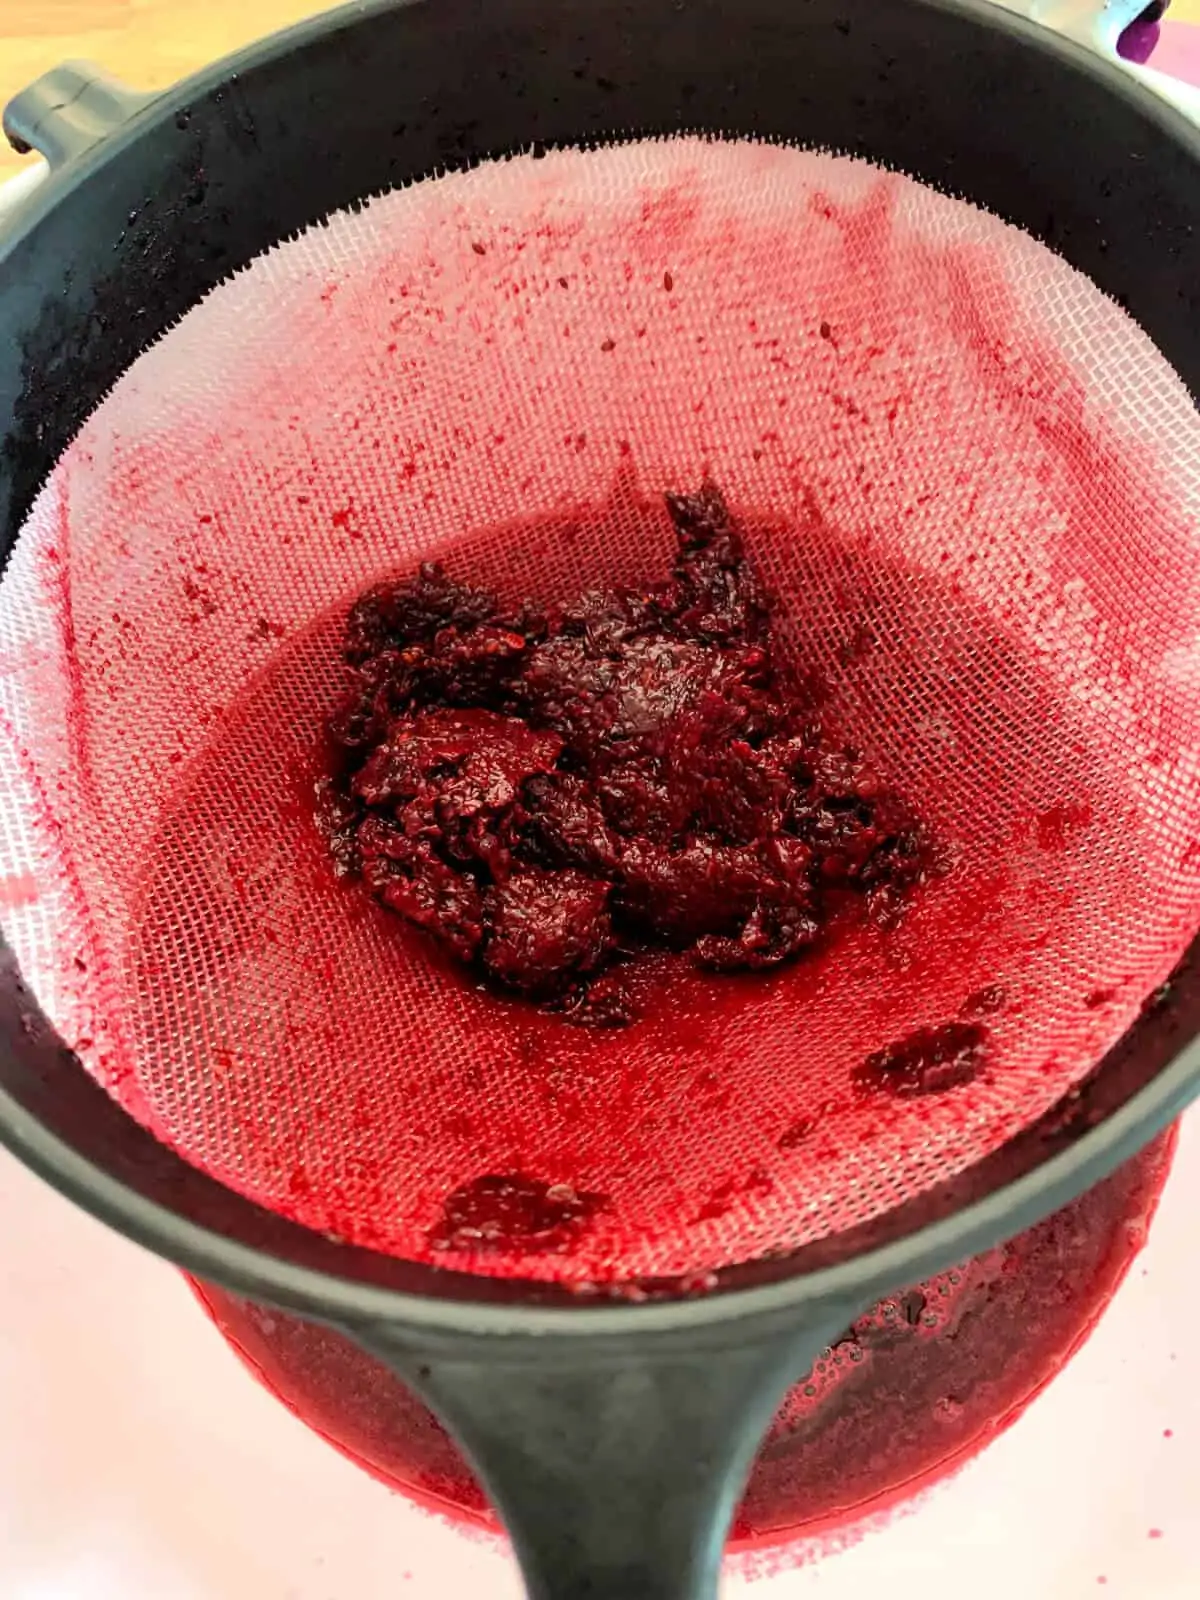 Remains of blackcurrant puree in a sieve, only dry material remaining.